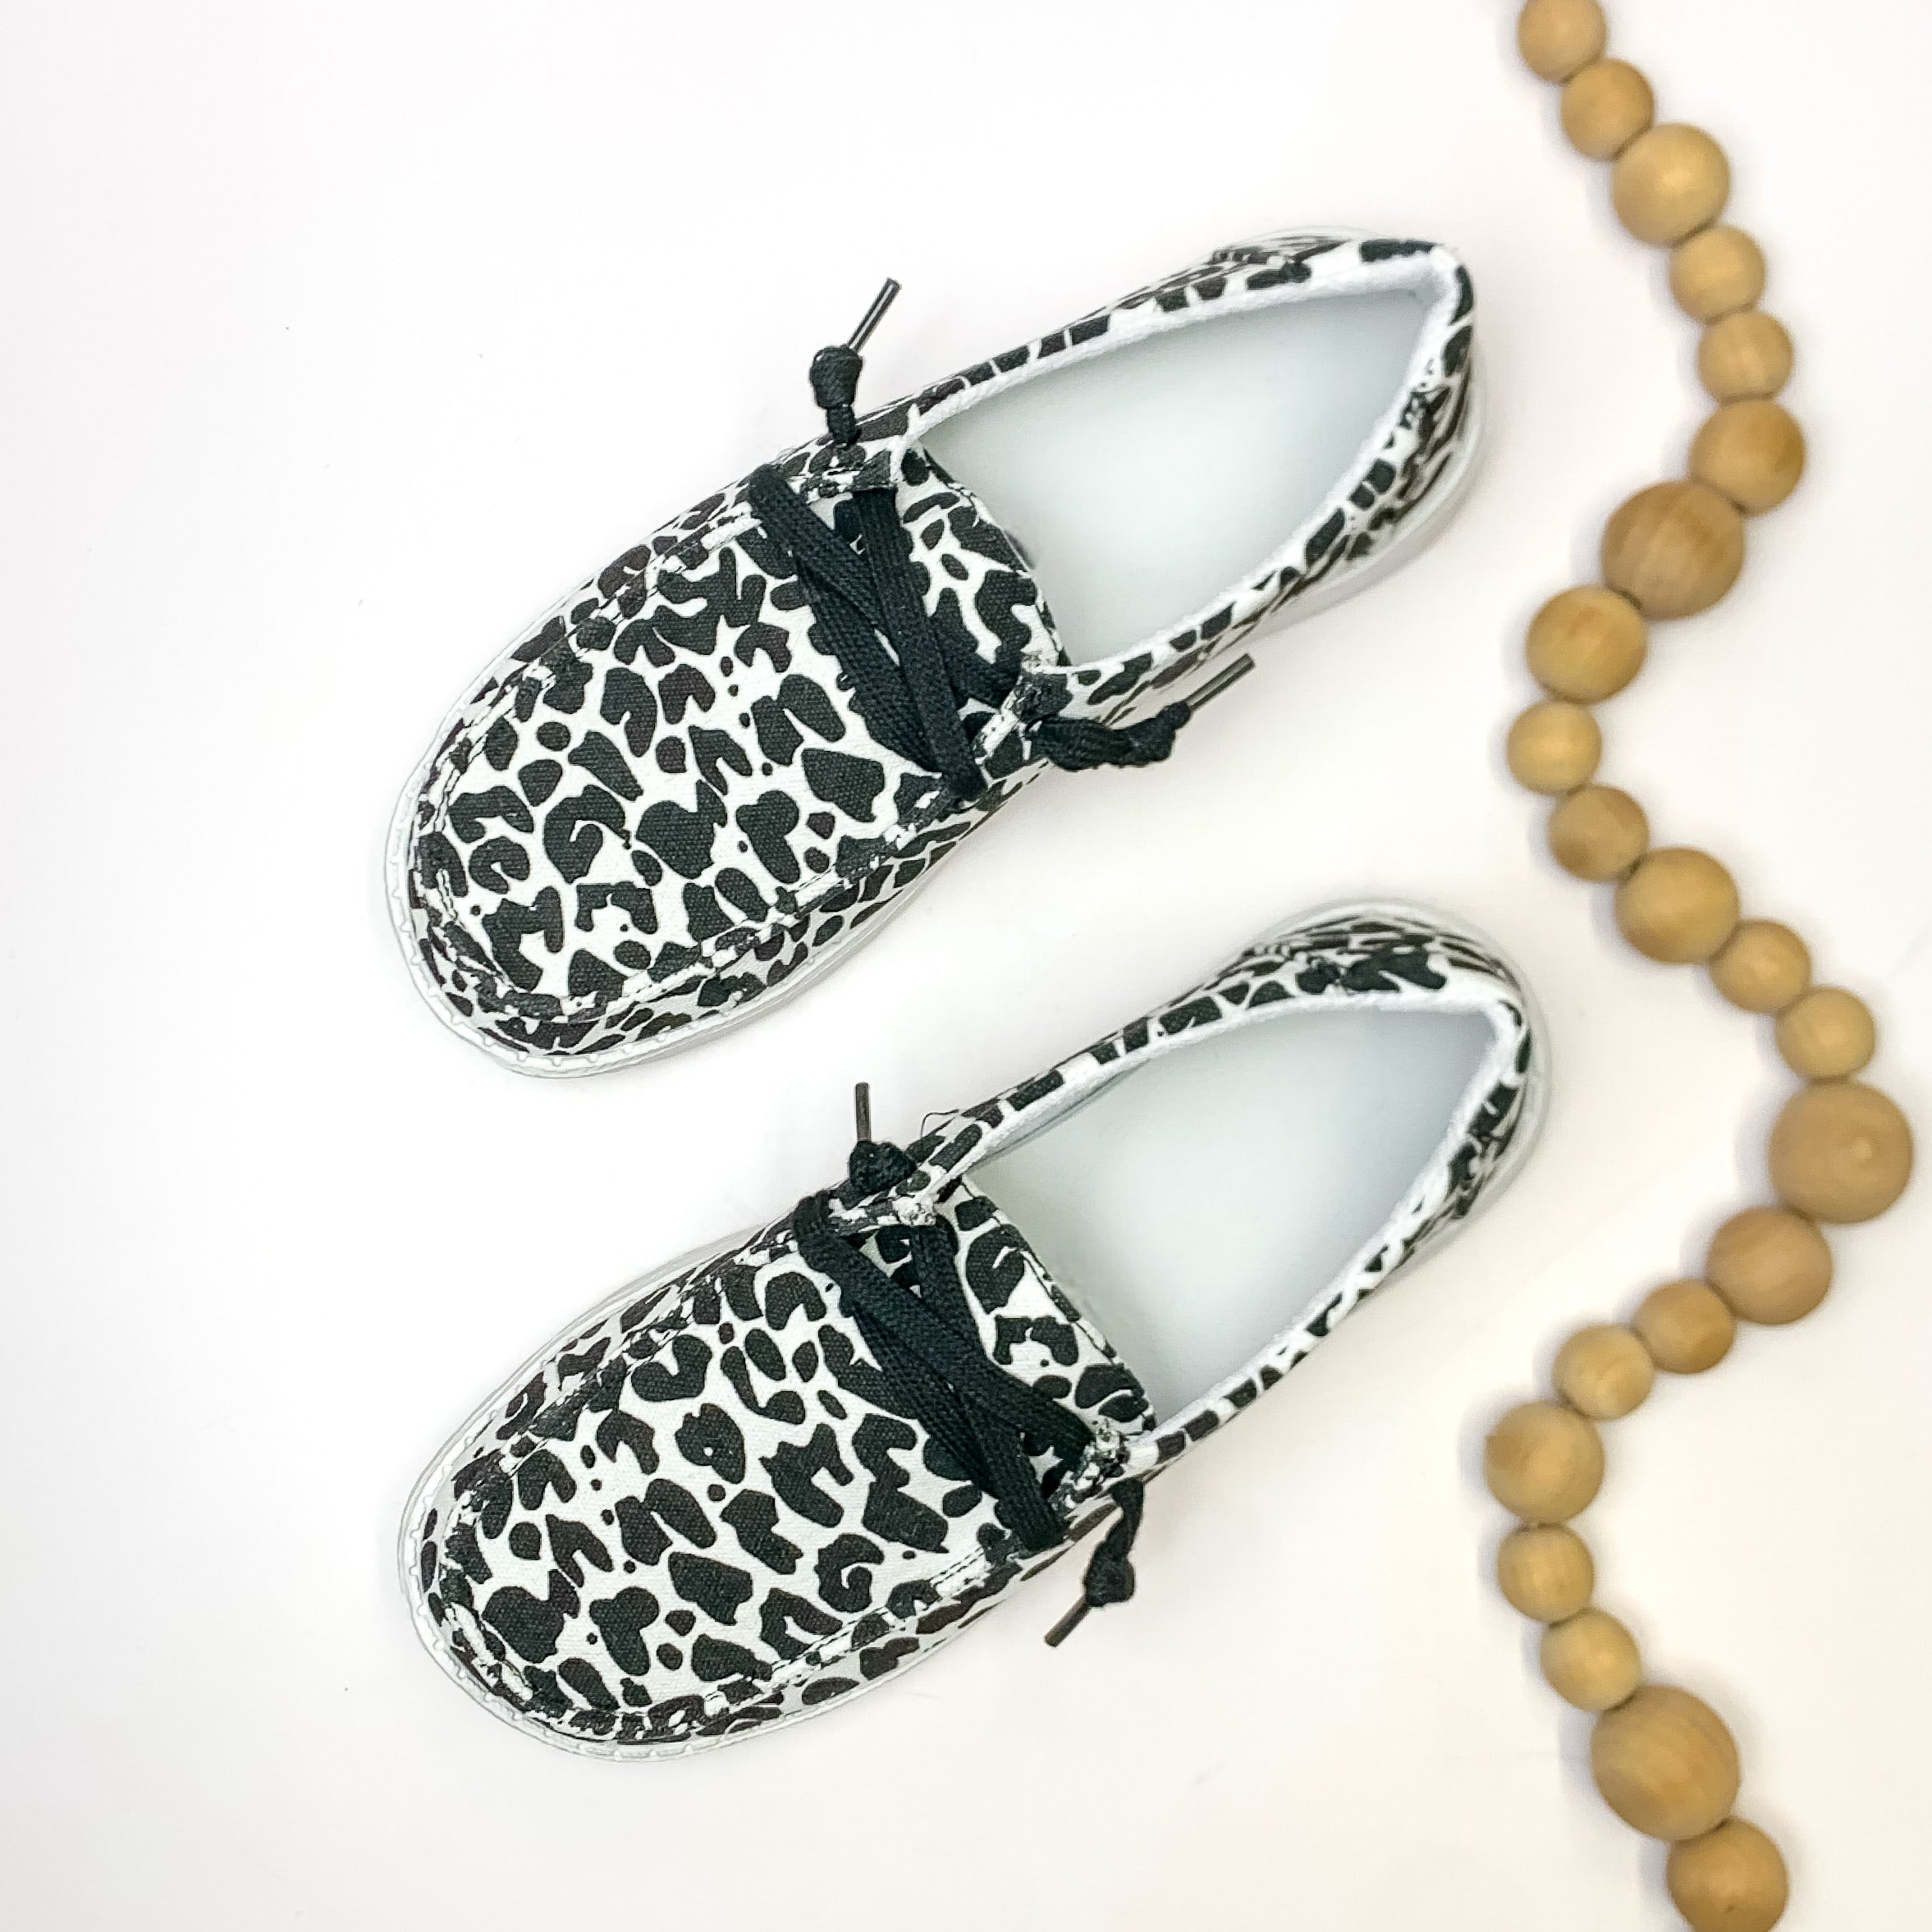 Very G | Have To Run Slip On Loafers with Laces in Black and White Leopard Print - Giddy Up Glamour Boutique